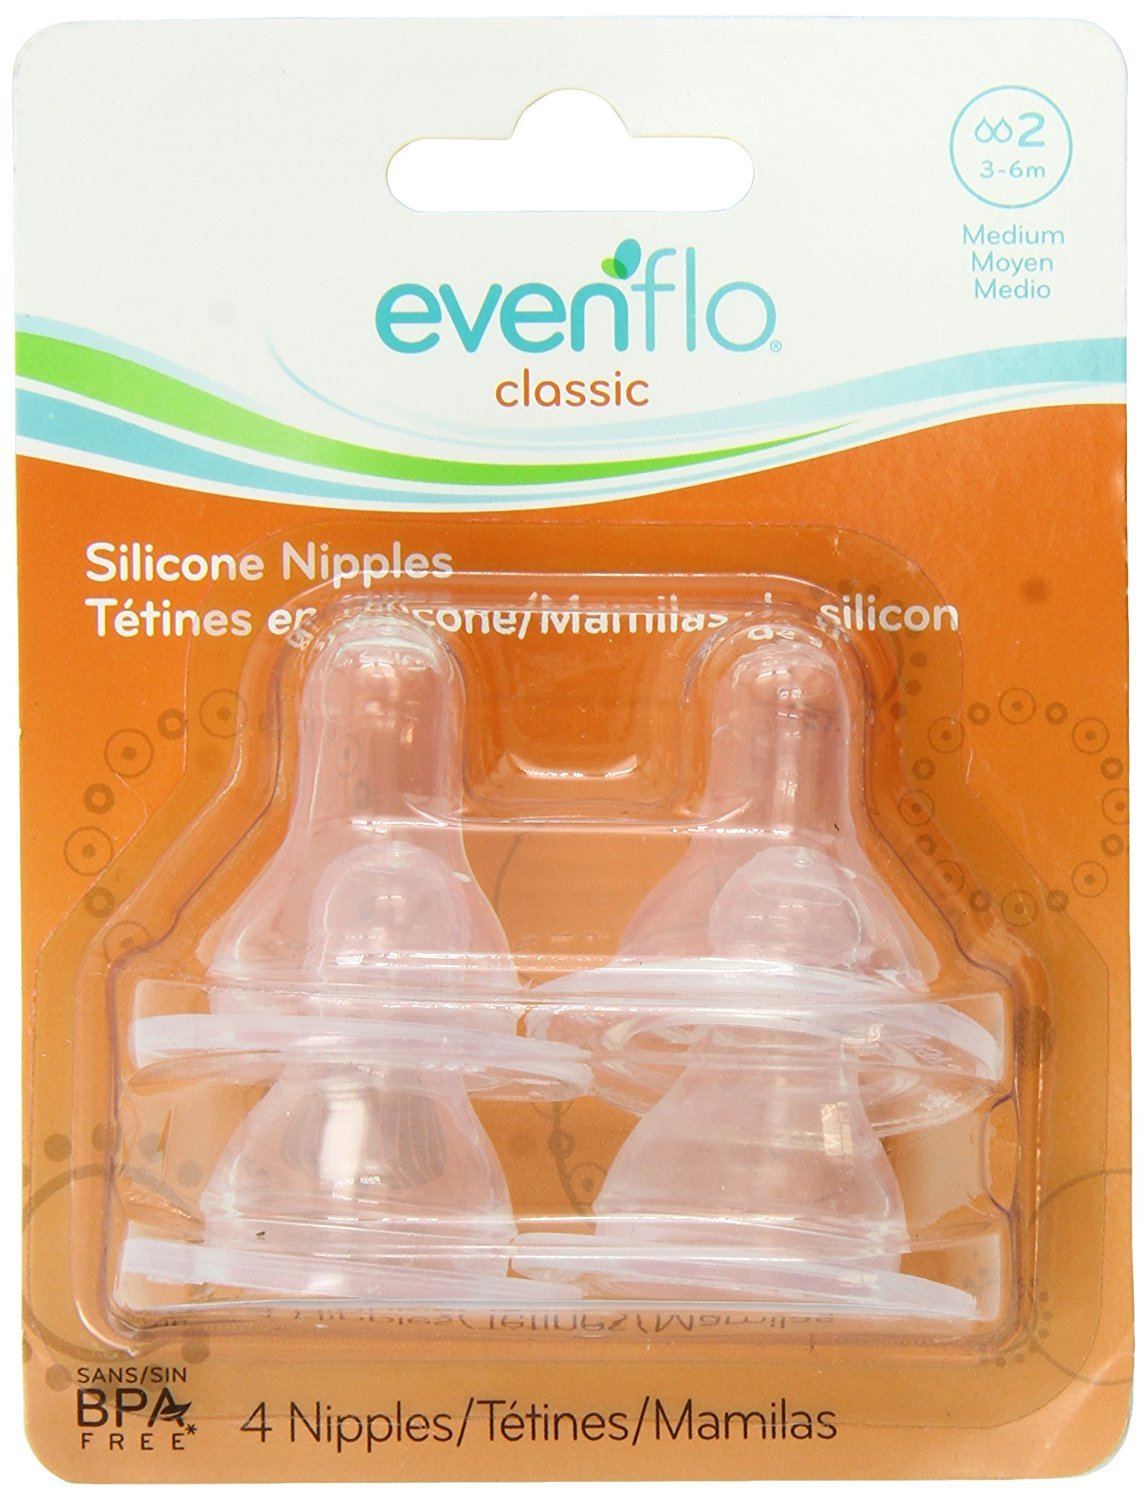 Evenflo 4 Pack Classic Silicone Nipple, Medium Flow (3-6 months) - image 1 of 3